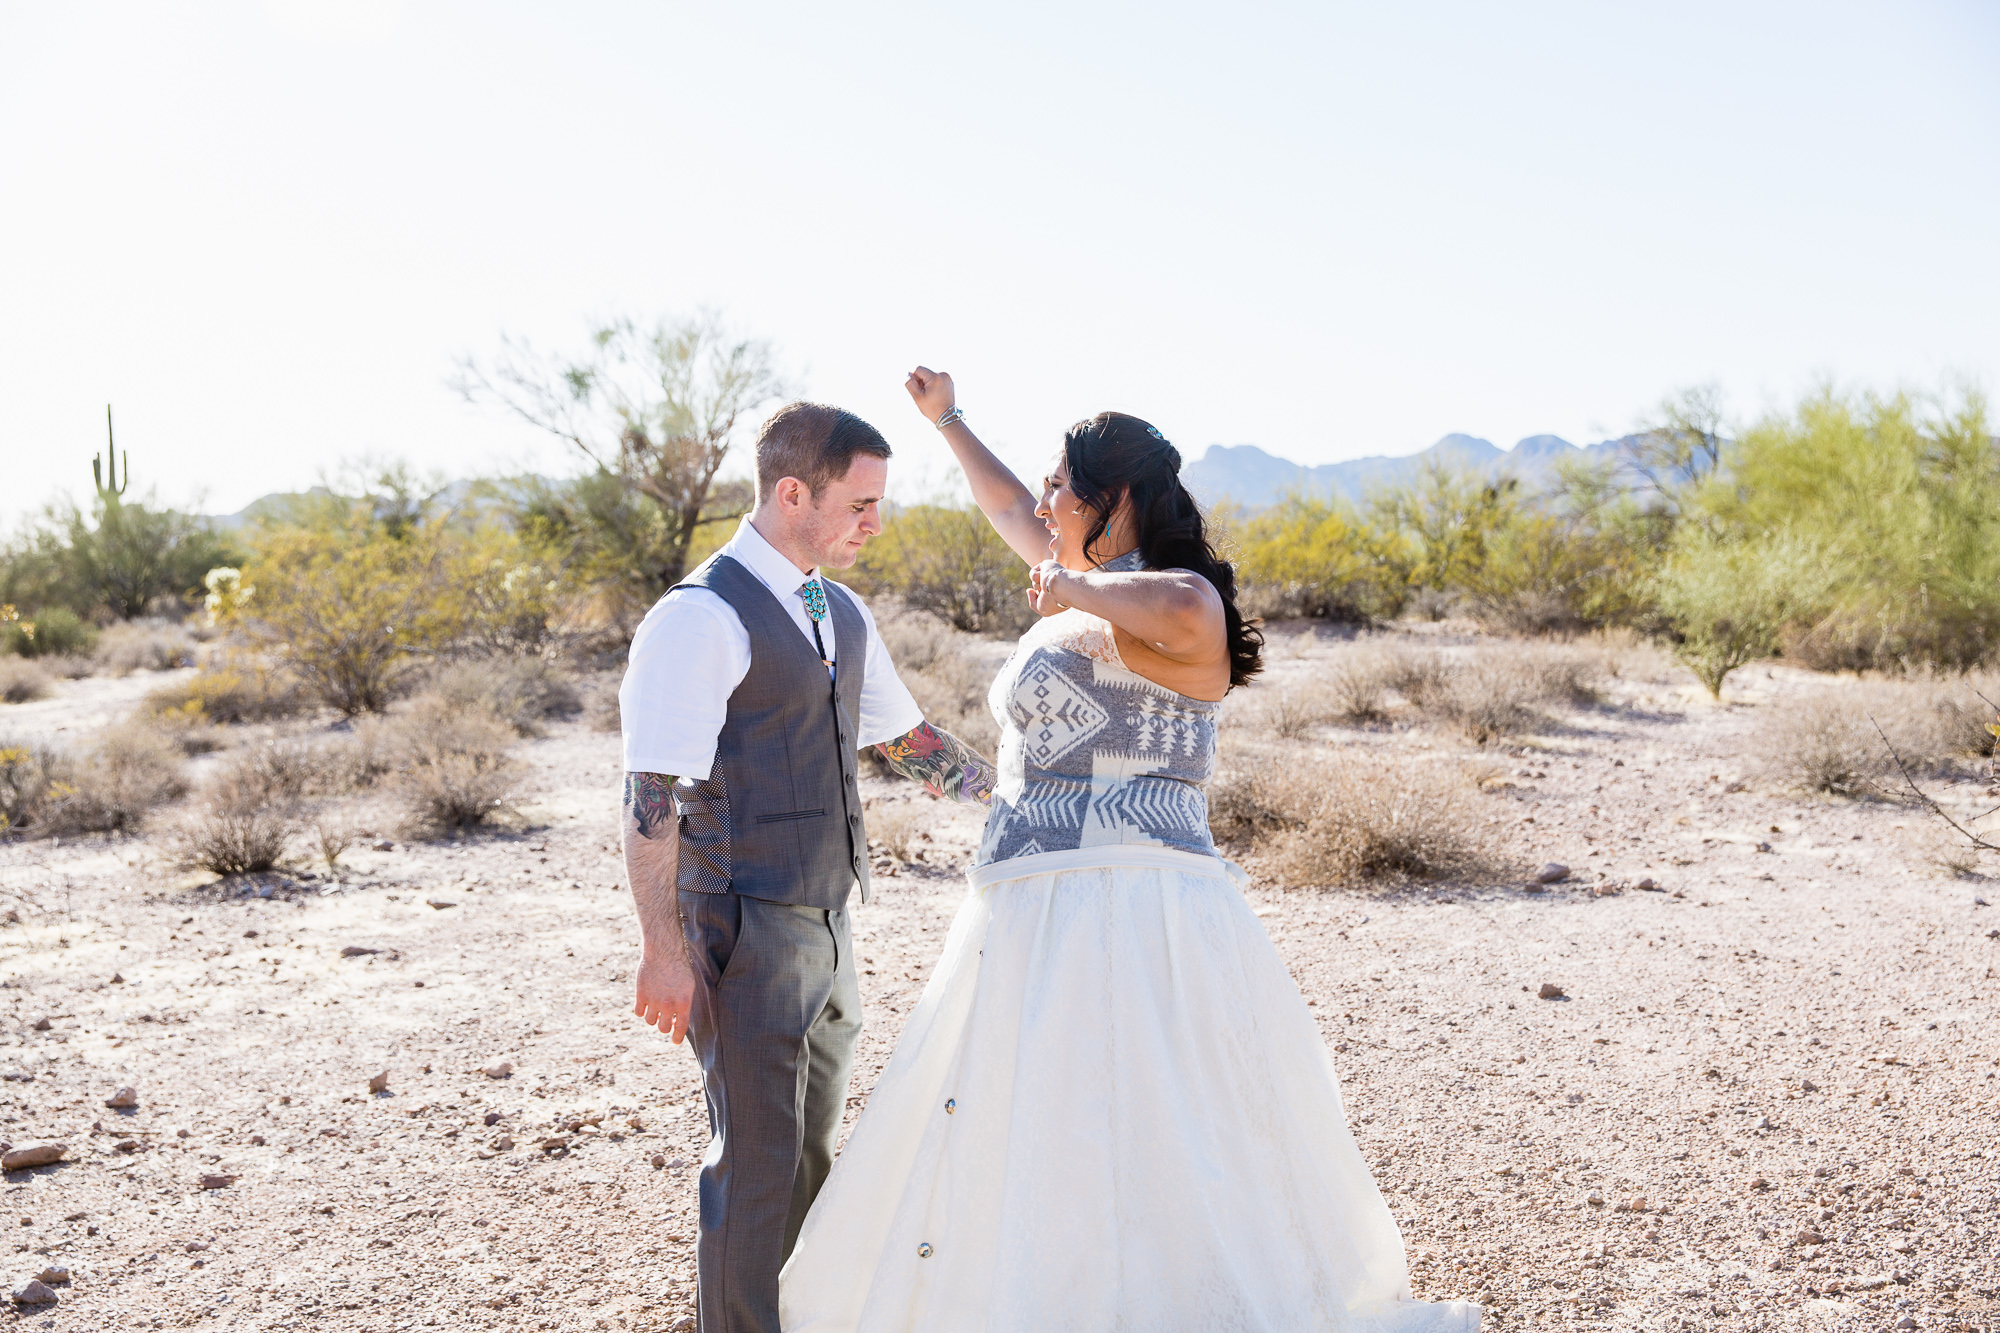 Bride and groom taking a dance break after their wedding ceremony by Arizona wedding photographer PMA Photography.